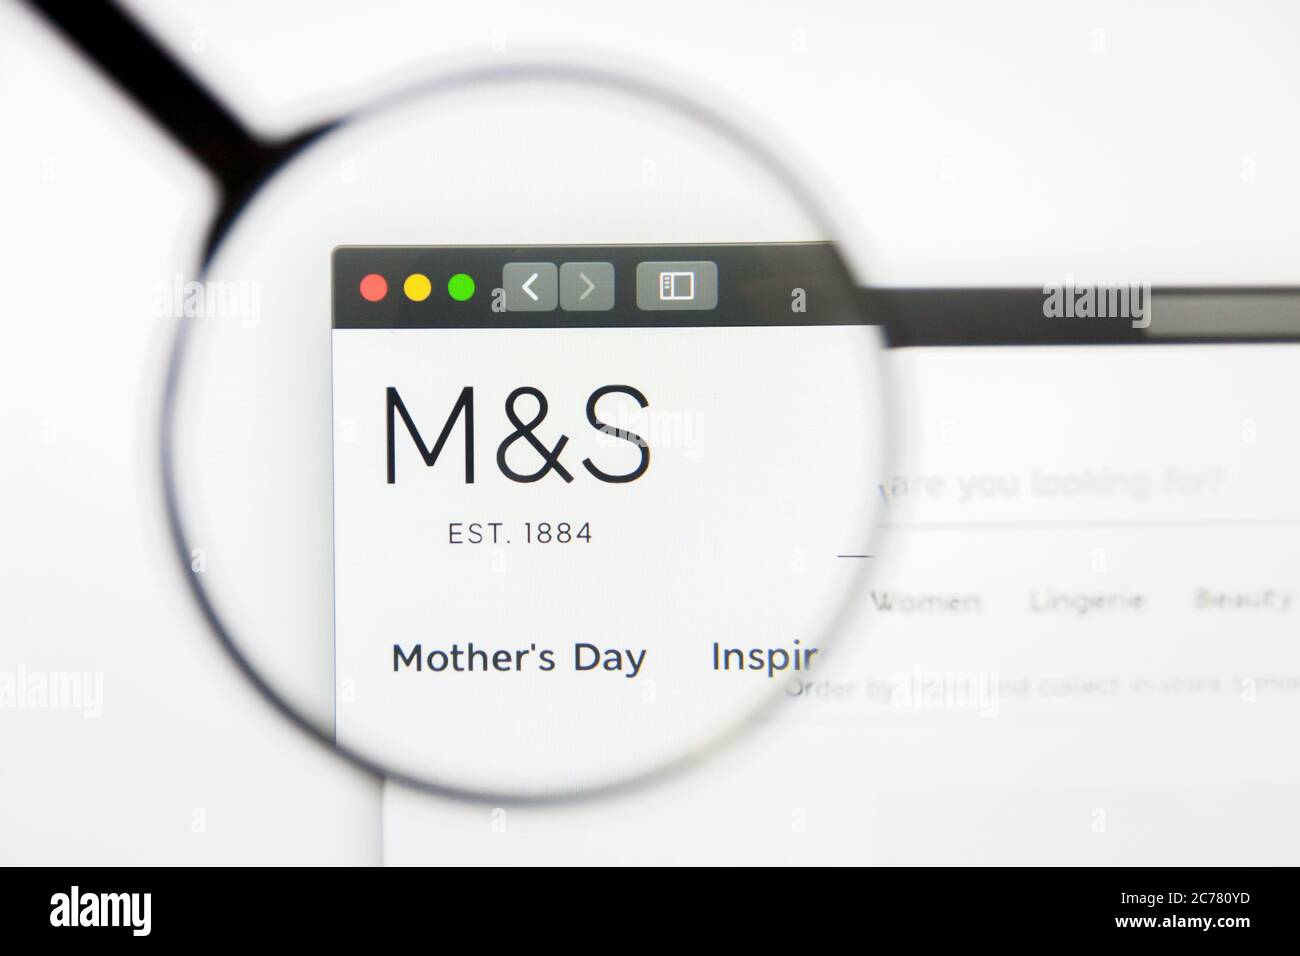 Los Angeles, California, USA - 10 March 2019: Illustrative Editorial, Marks and Spencer website homepage. Marks and Spencer logo visible on display Stock Photo